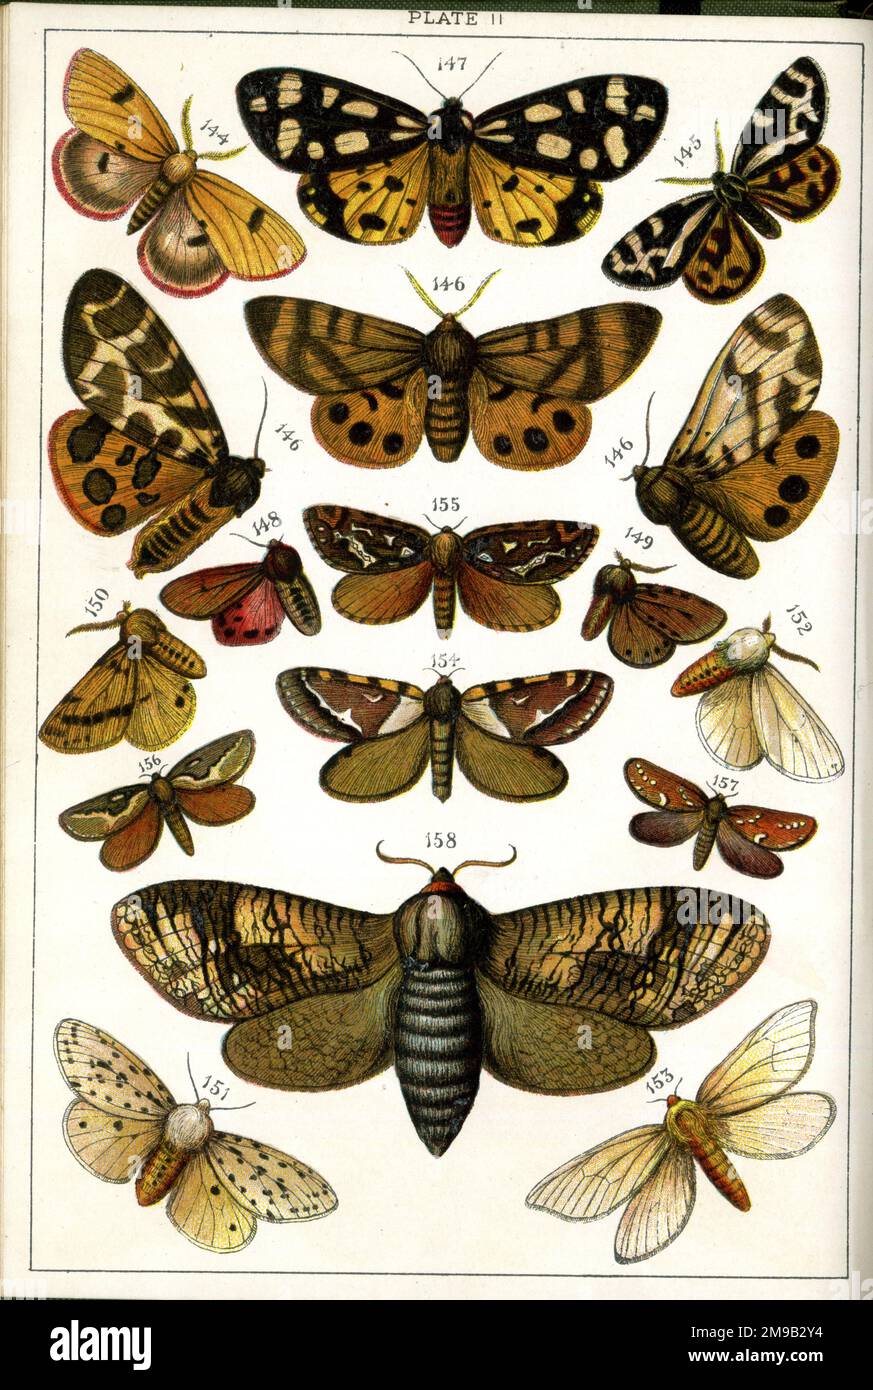 Butterflies and Moths, Plate 11, Bombyces, Arctiadae, Hepialidae, Cossidae. Stock Photo